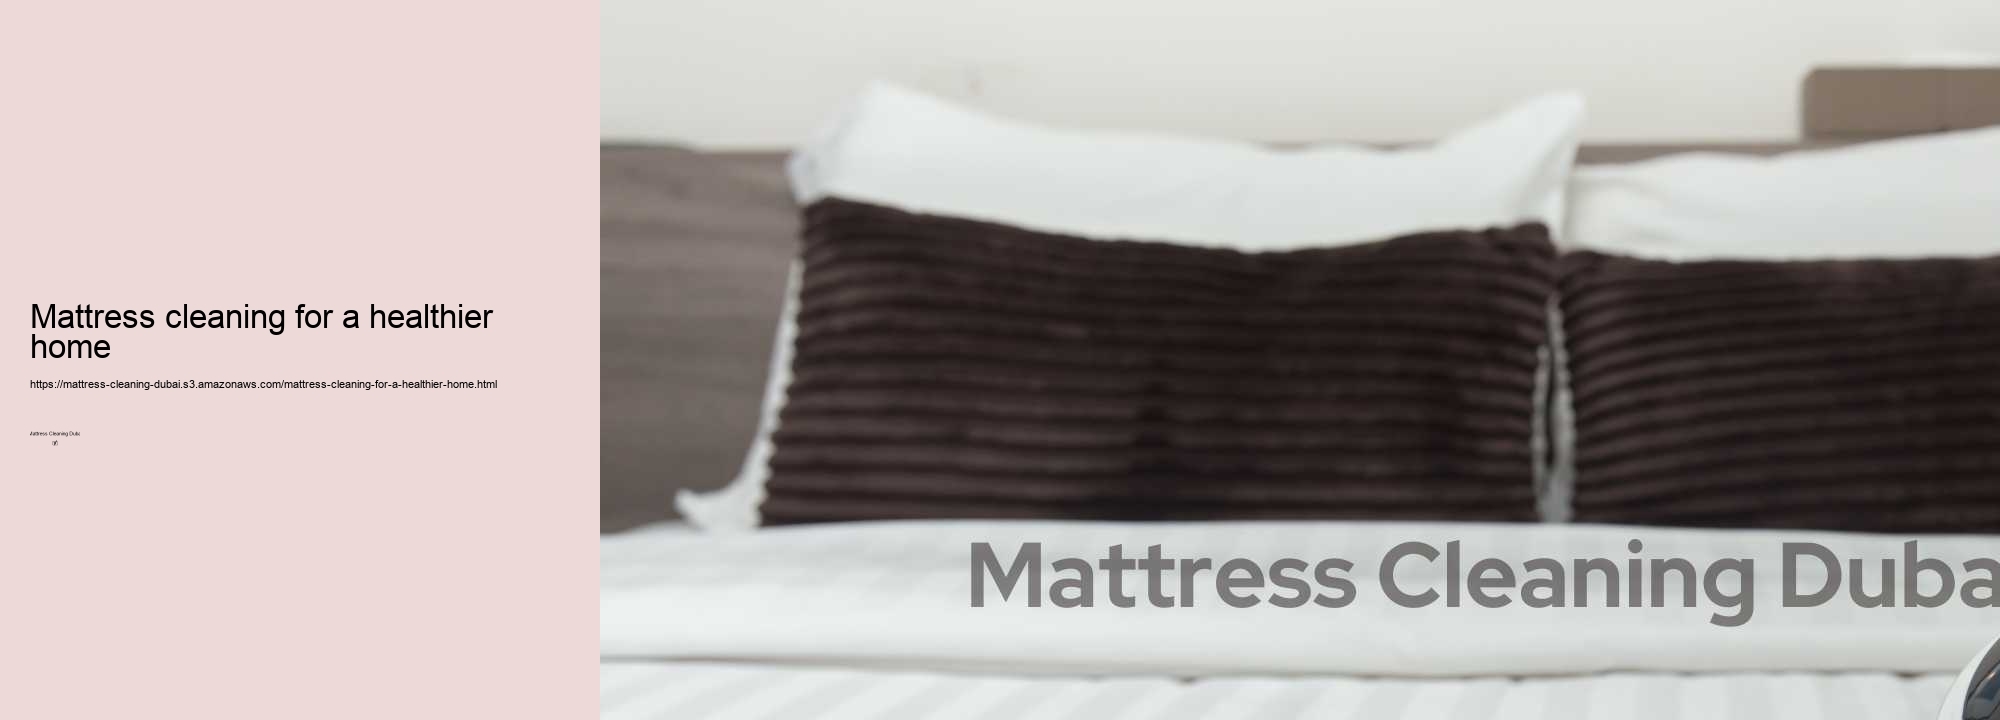 Mattress cleaning for a healthier home